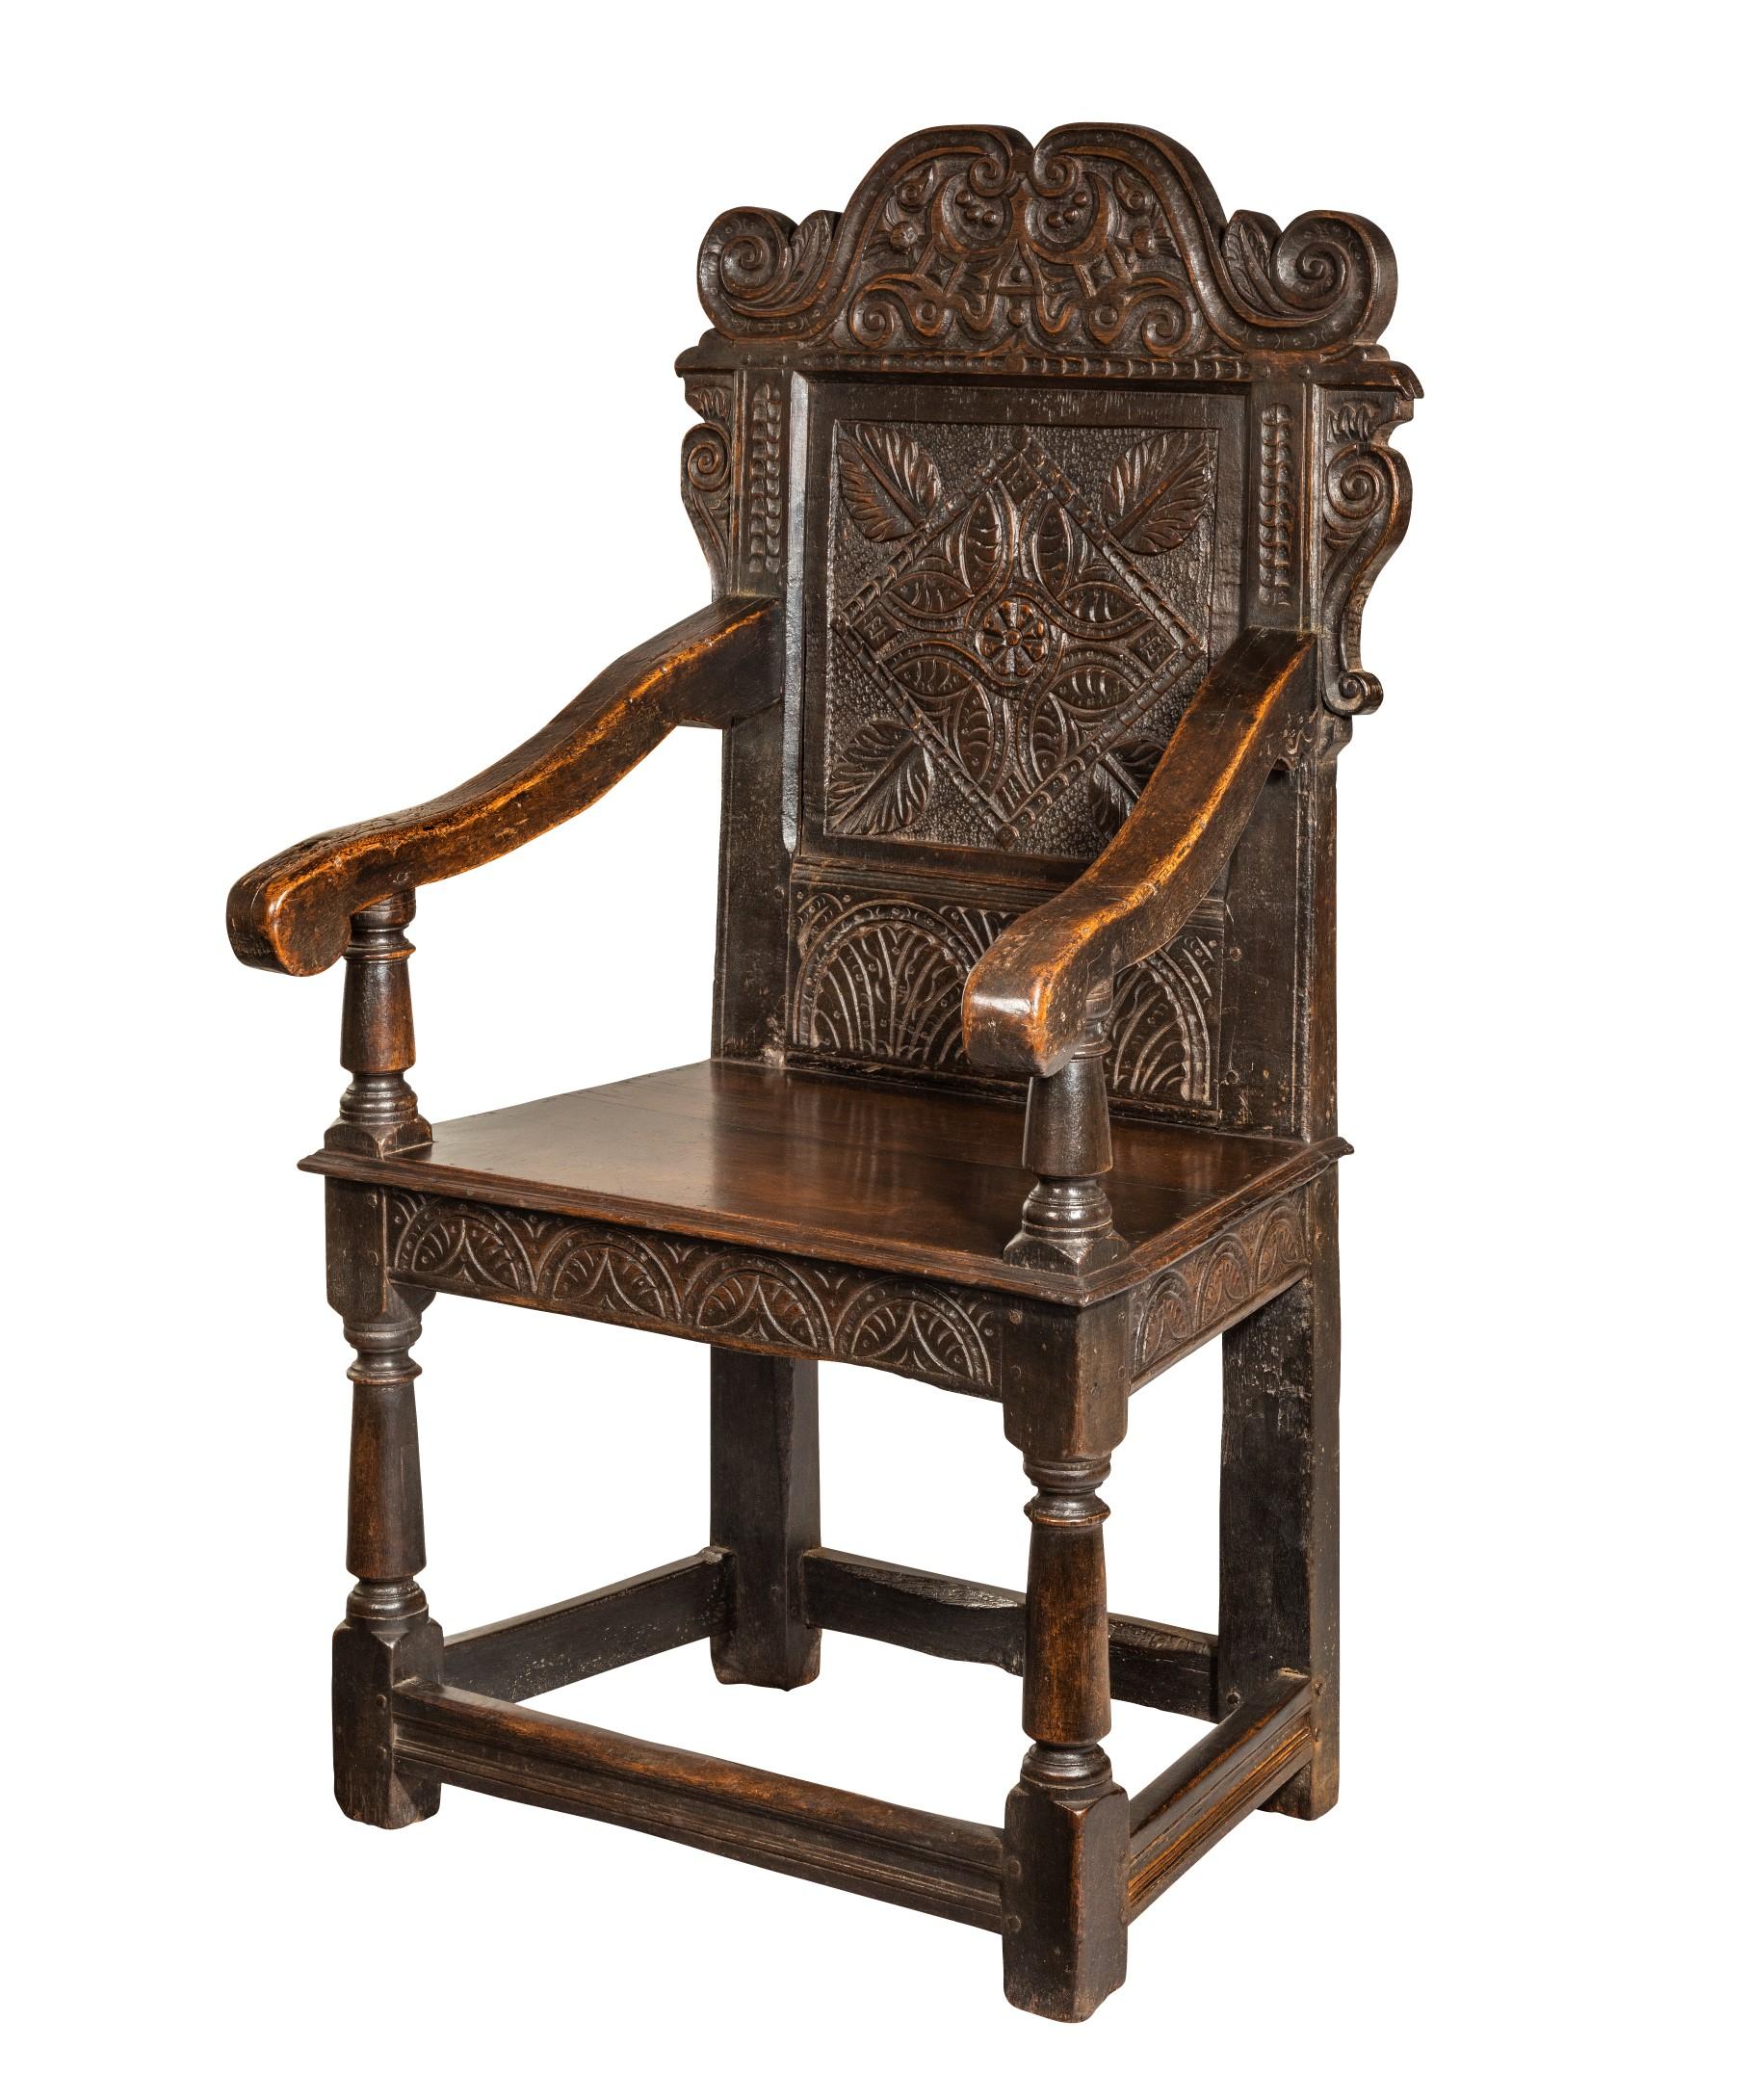 A superb Charles II Yorkshire carved oak armchair; the armchair's scrolling cresting rail carved with thistles and stylised foliage above scrolling ear pieces and downswept arms which flank a panelled back boldly carved with central diamond